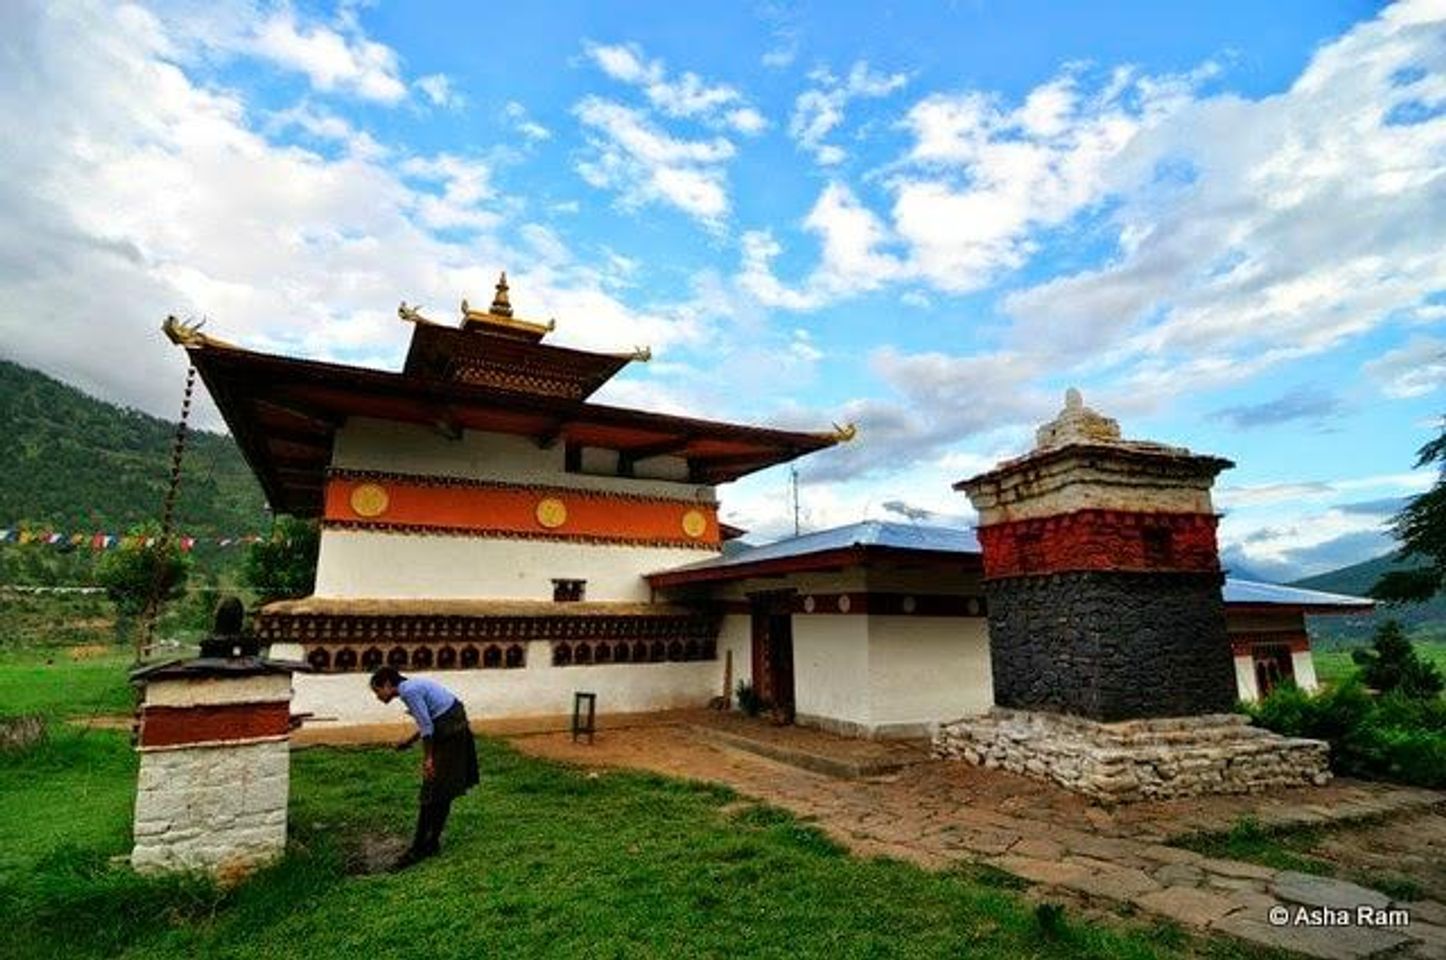 The Chime Lhakhang temple complex